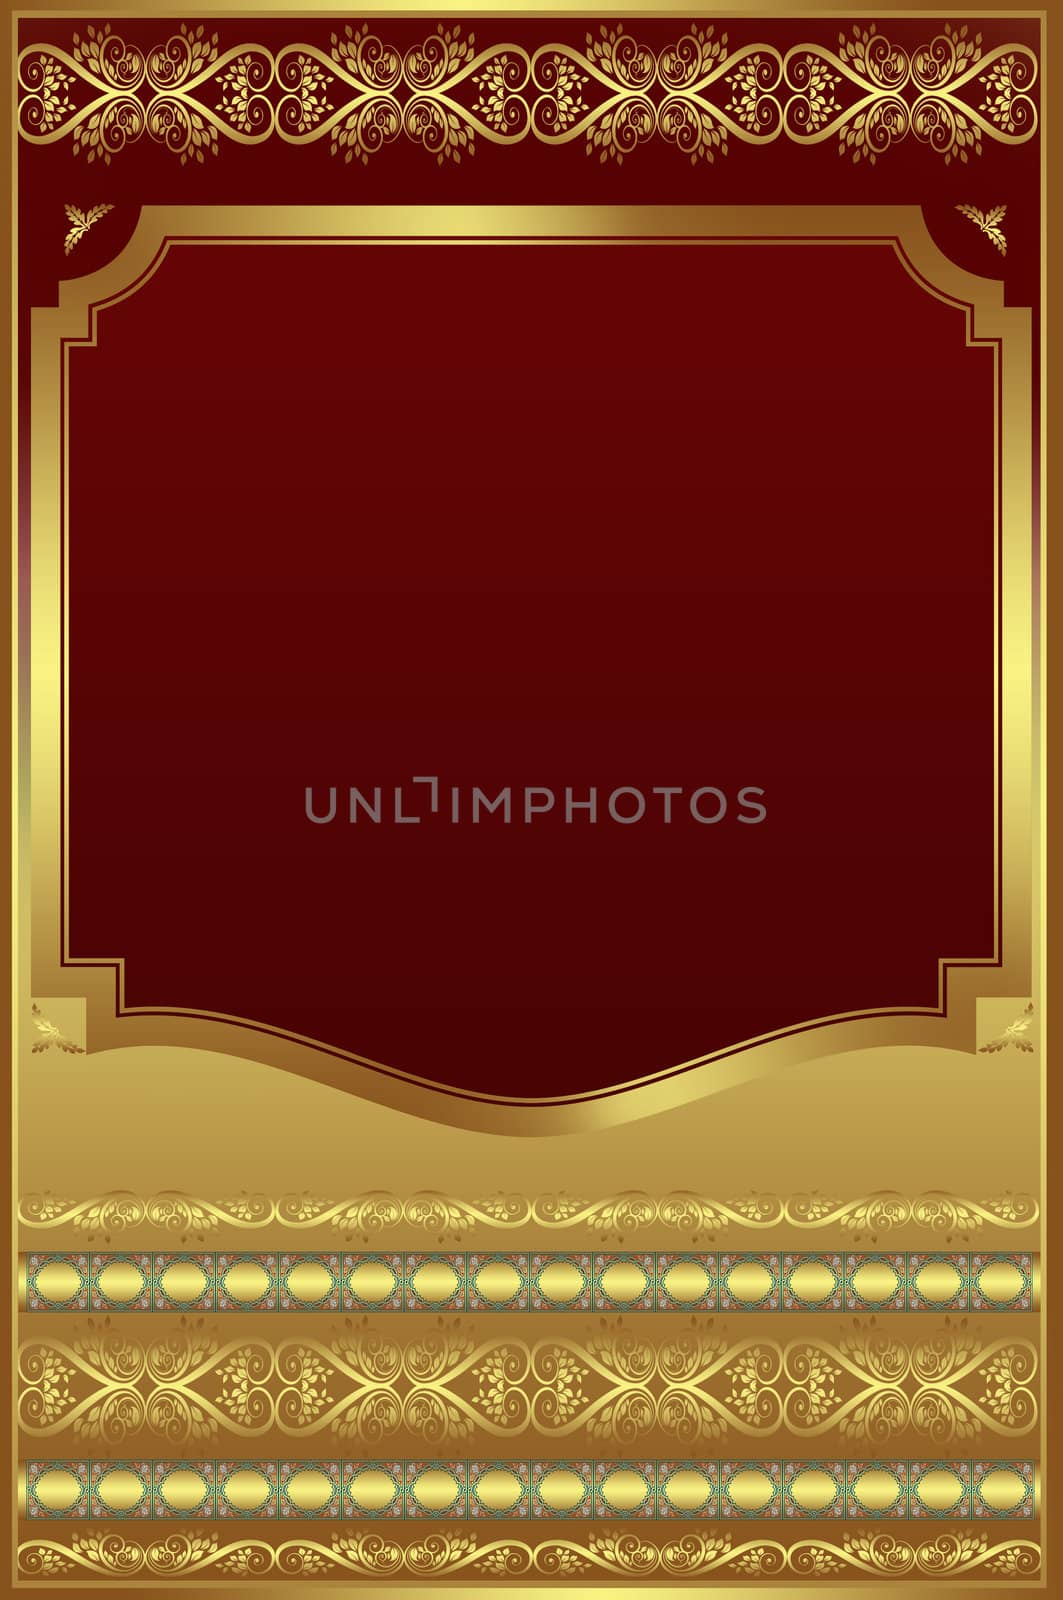 Decorative background with golden frame and decorative patterns